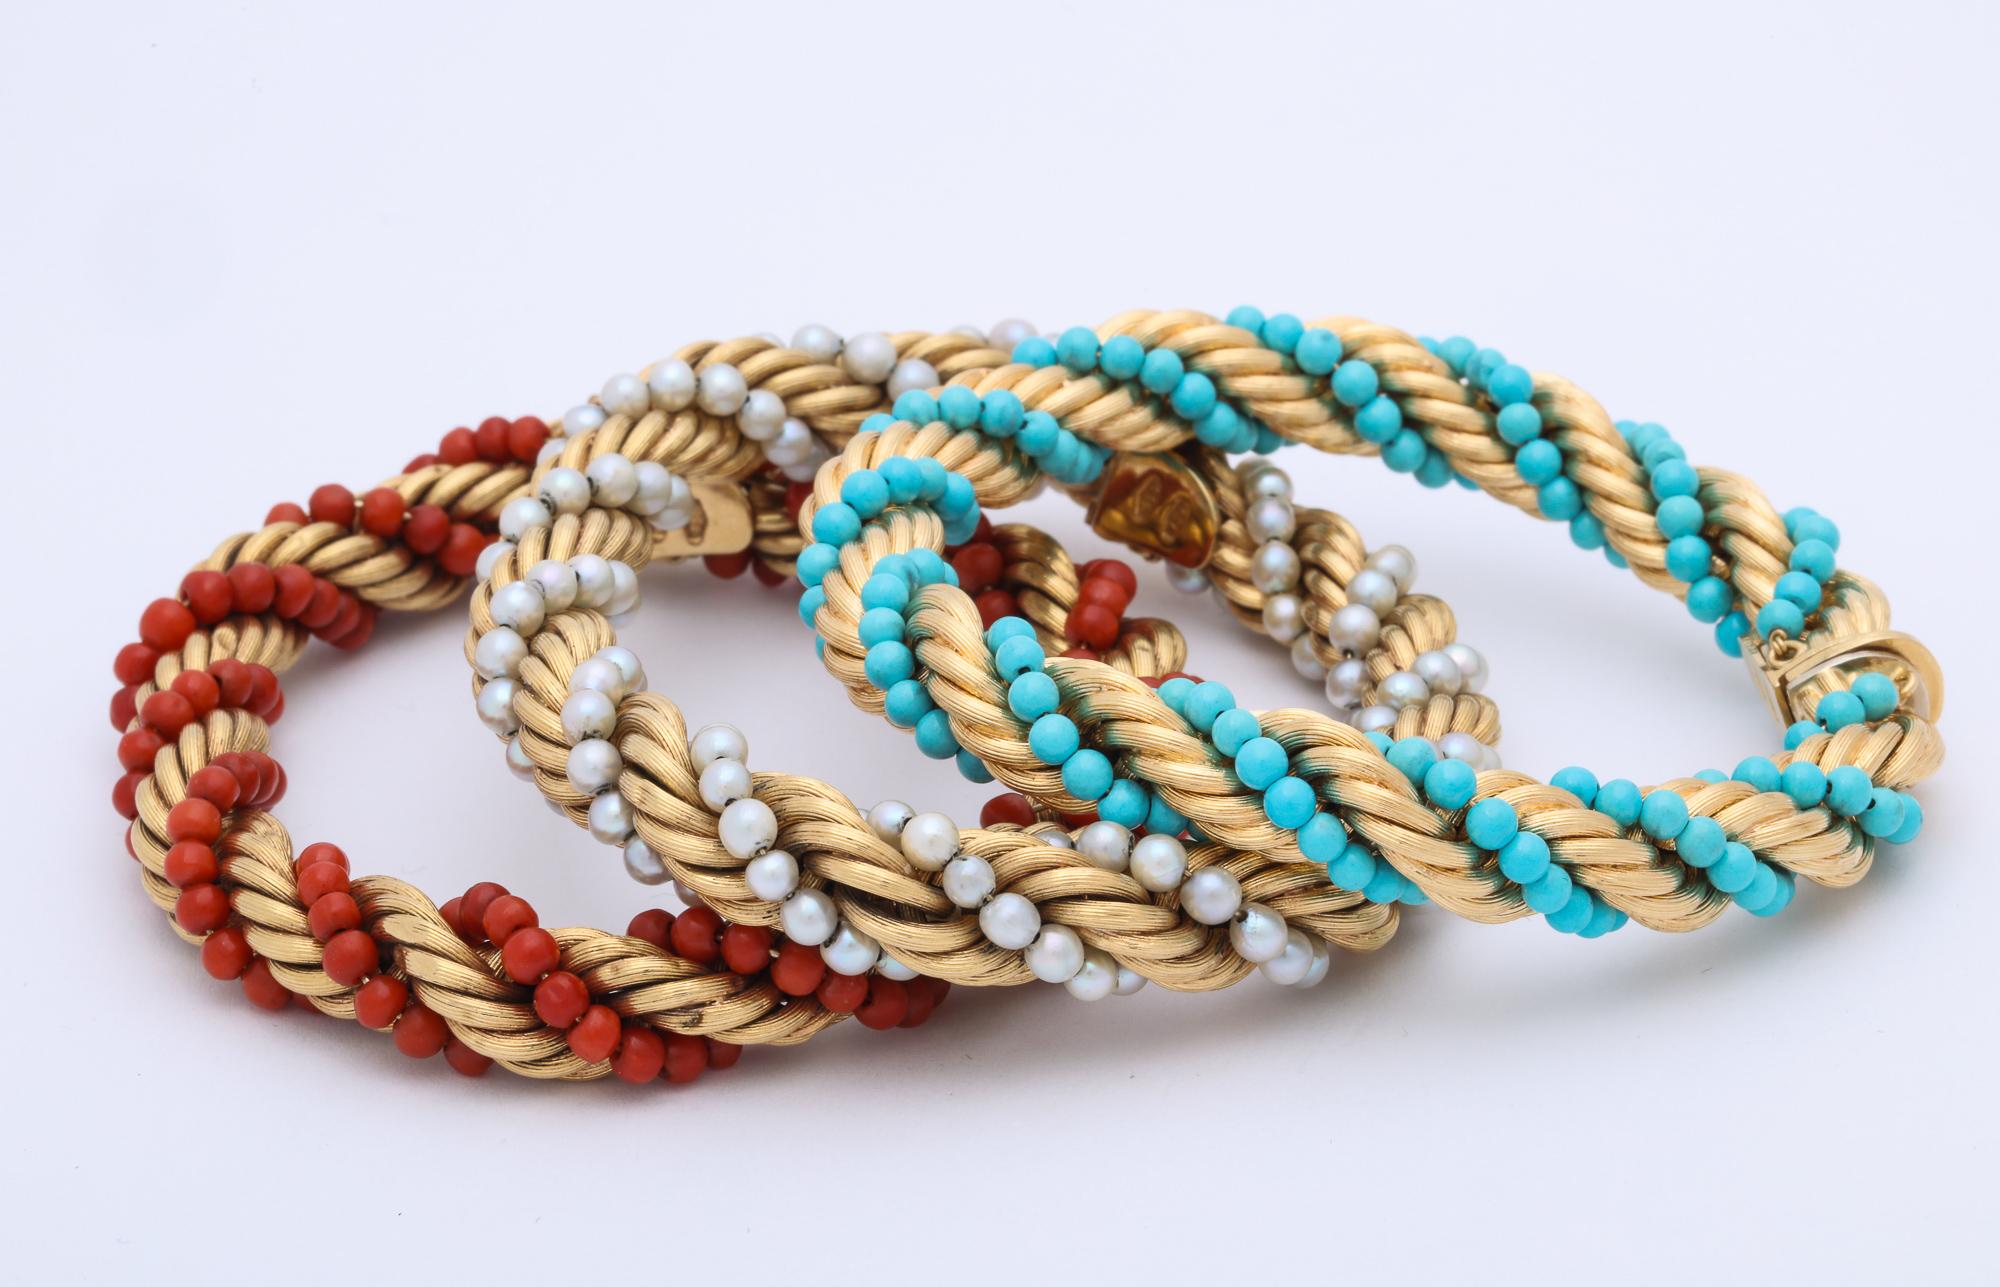 Triple Set Of 18kt Yellow Ridged Twisted Rope Design Gold Flexible Bangle Bracelets Composed Of One Alternating Coral Beads And Alternating Turquoise Beads And Last Stack Consisting Of 2MM Pearls,2 MM Turquoise Beads And Numerous 2MM Coral Beads.